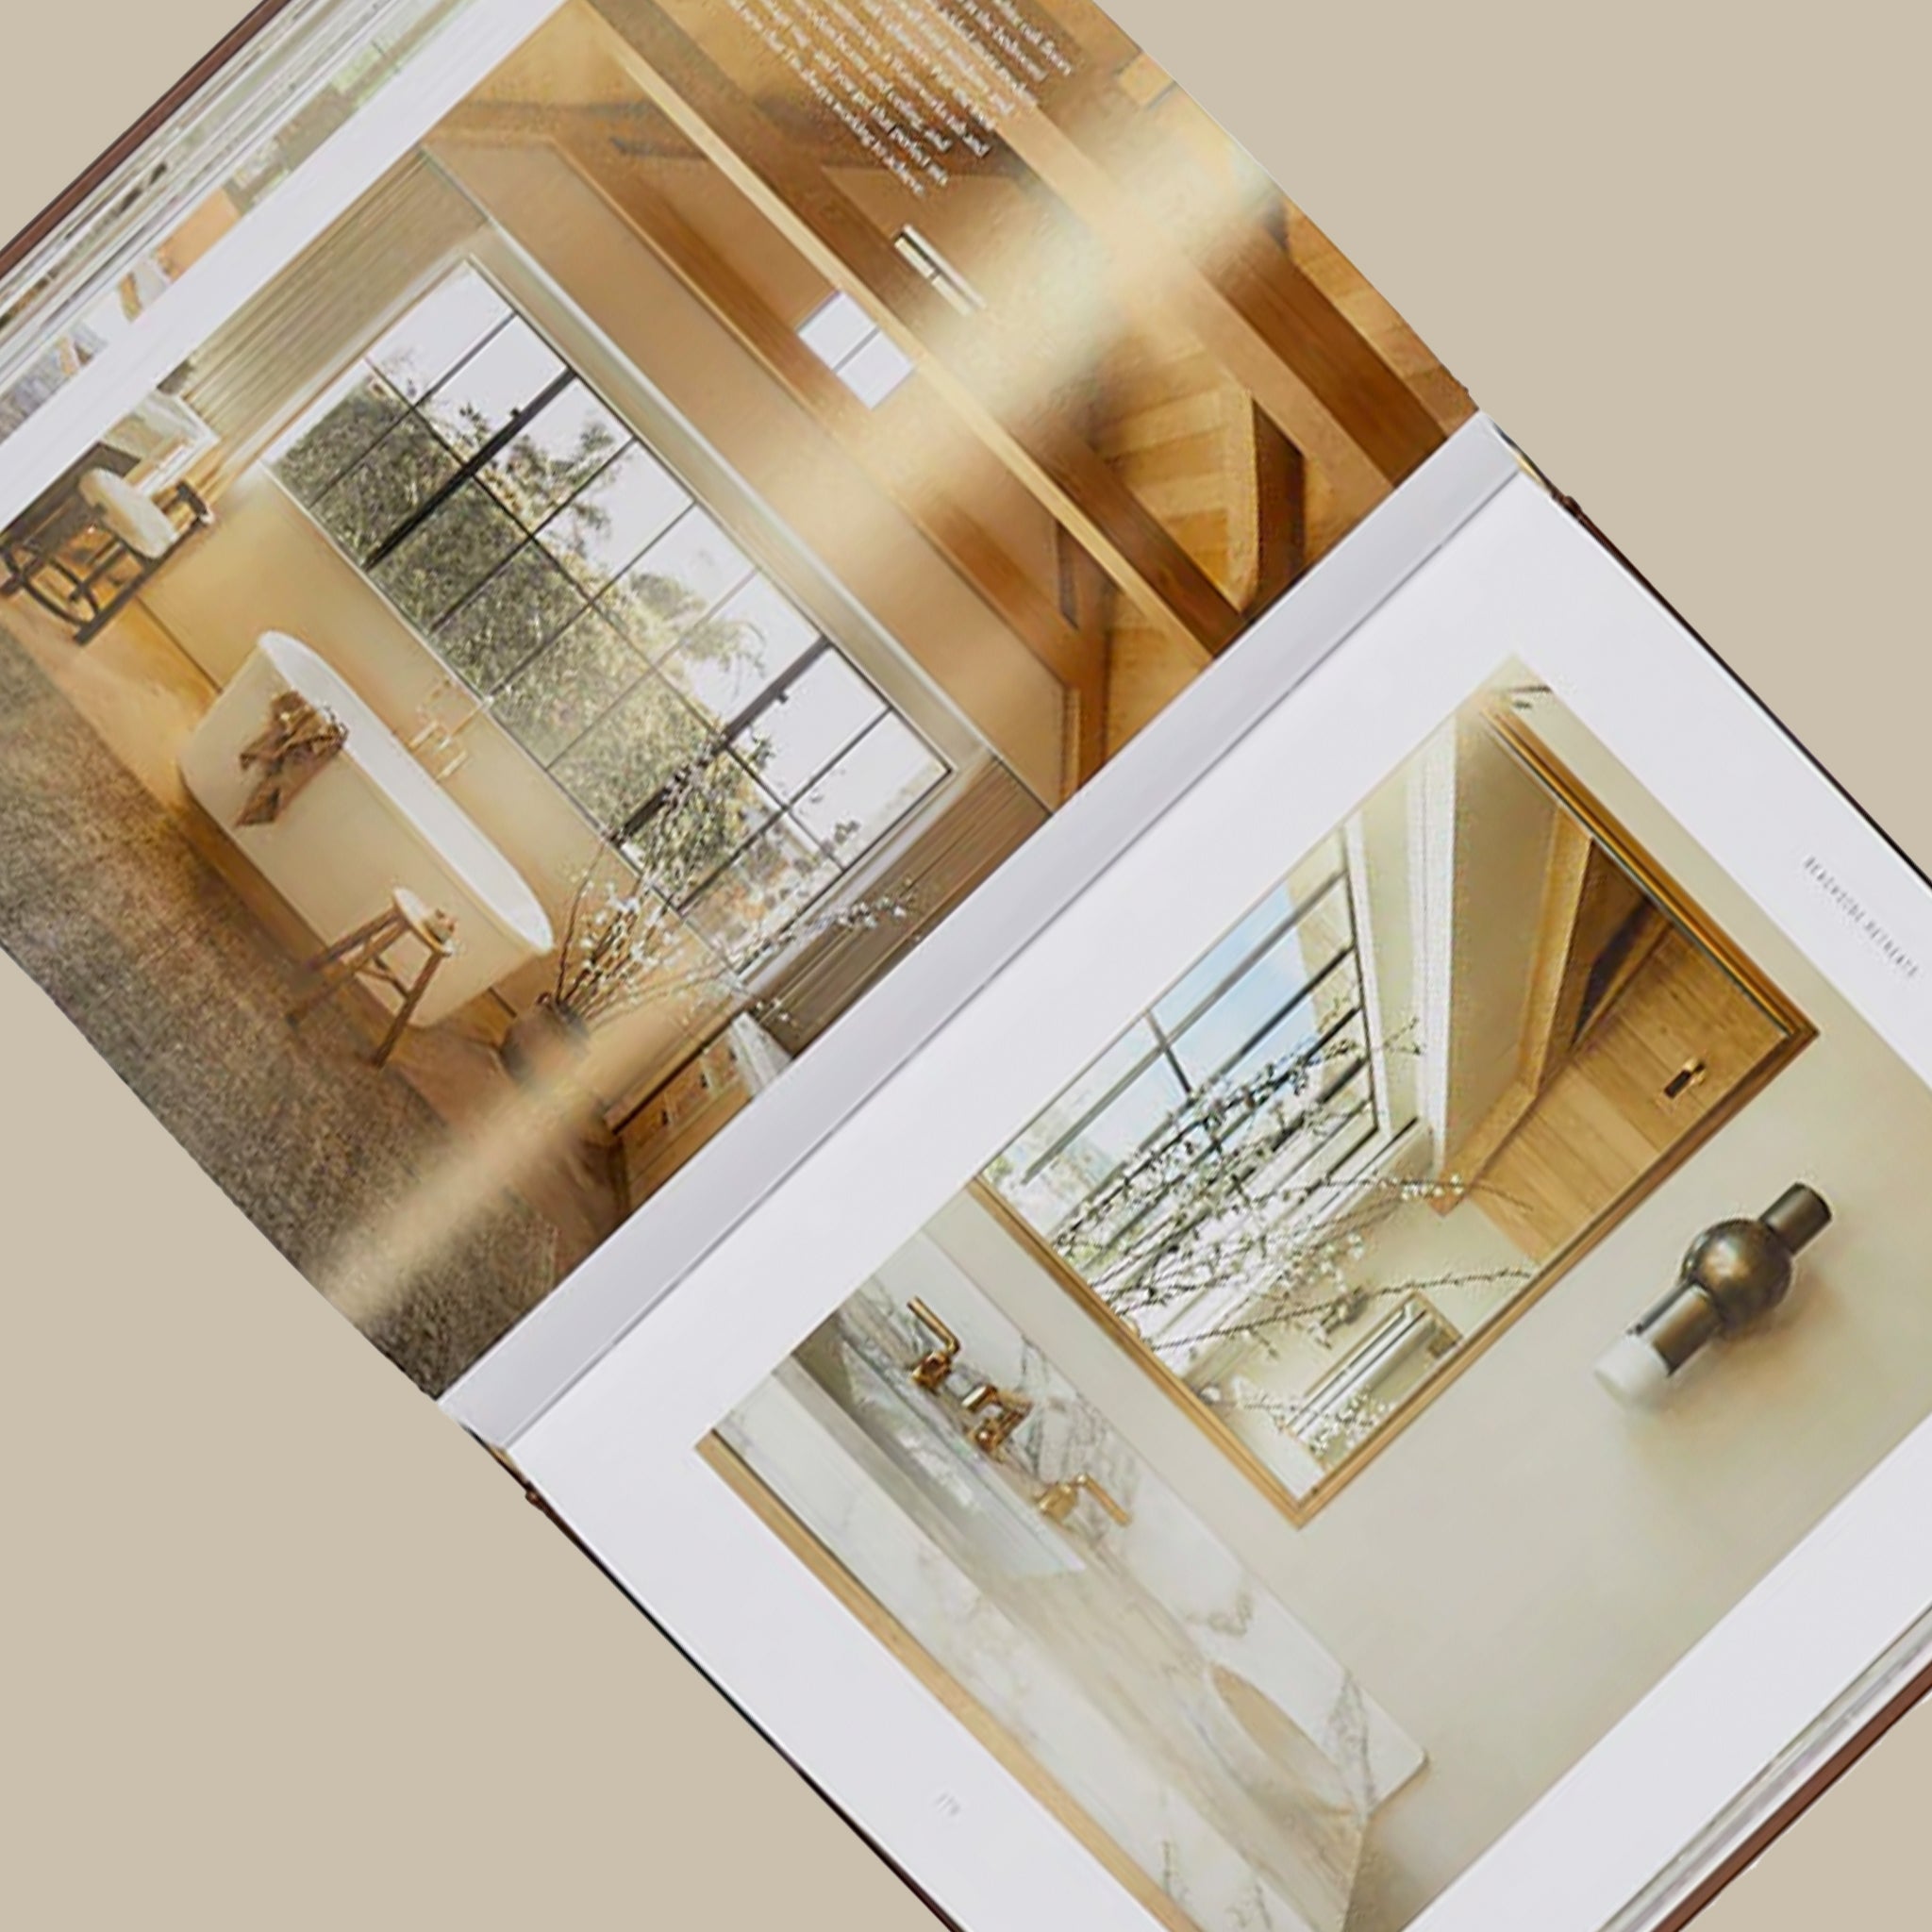 On a tan background is the book opened to a page in the book that features beautiful photographs of the interiors designed by Amber Lewis.